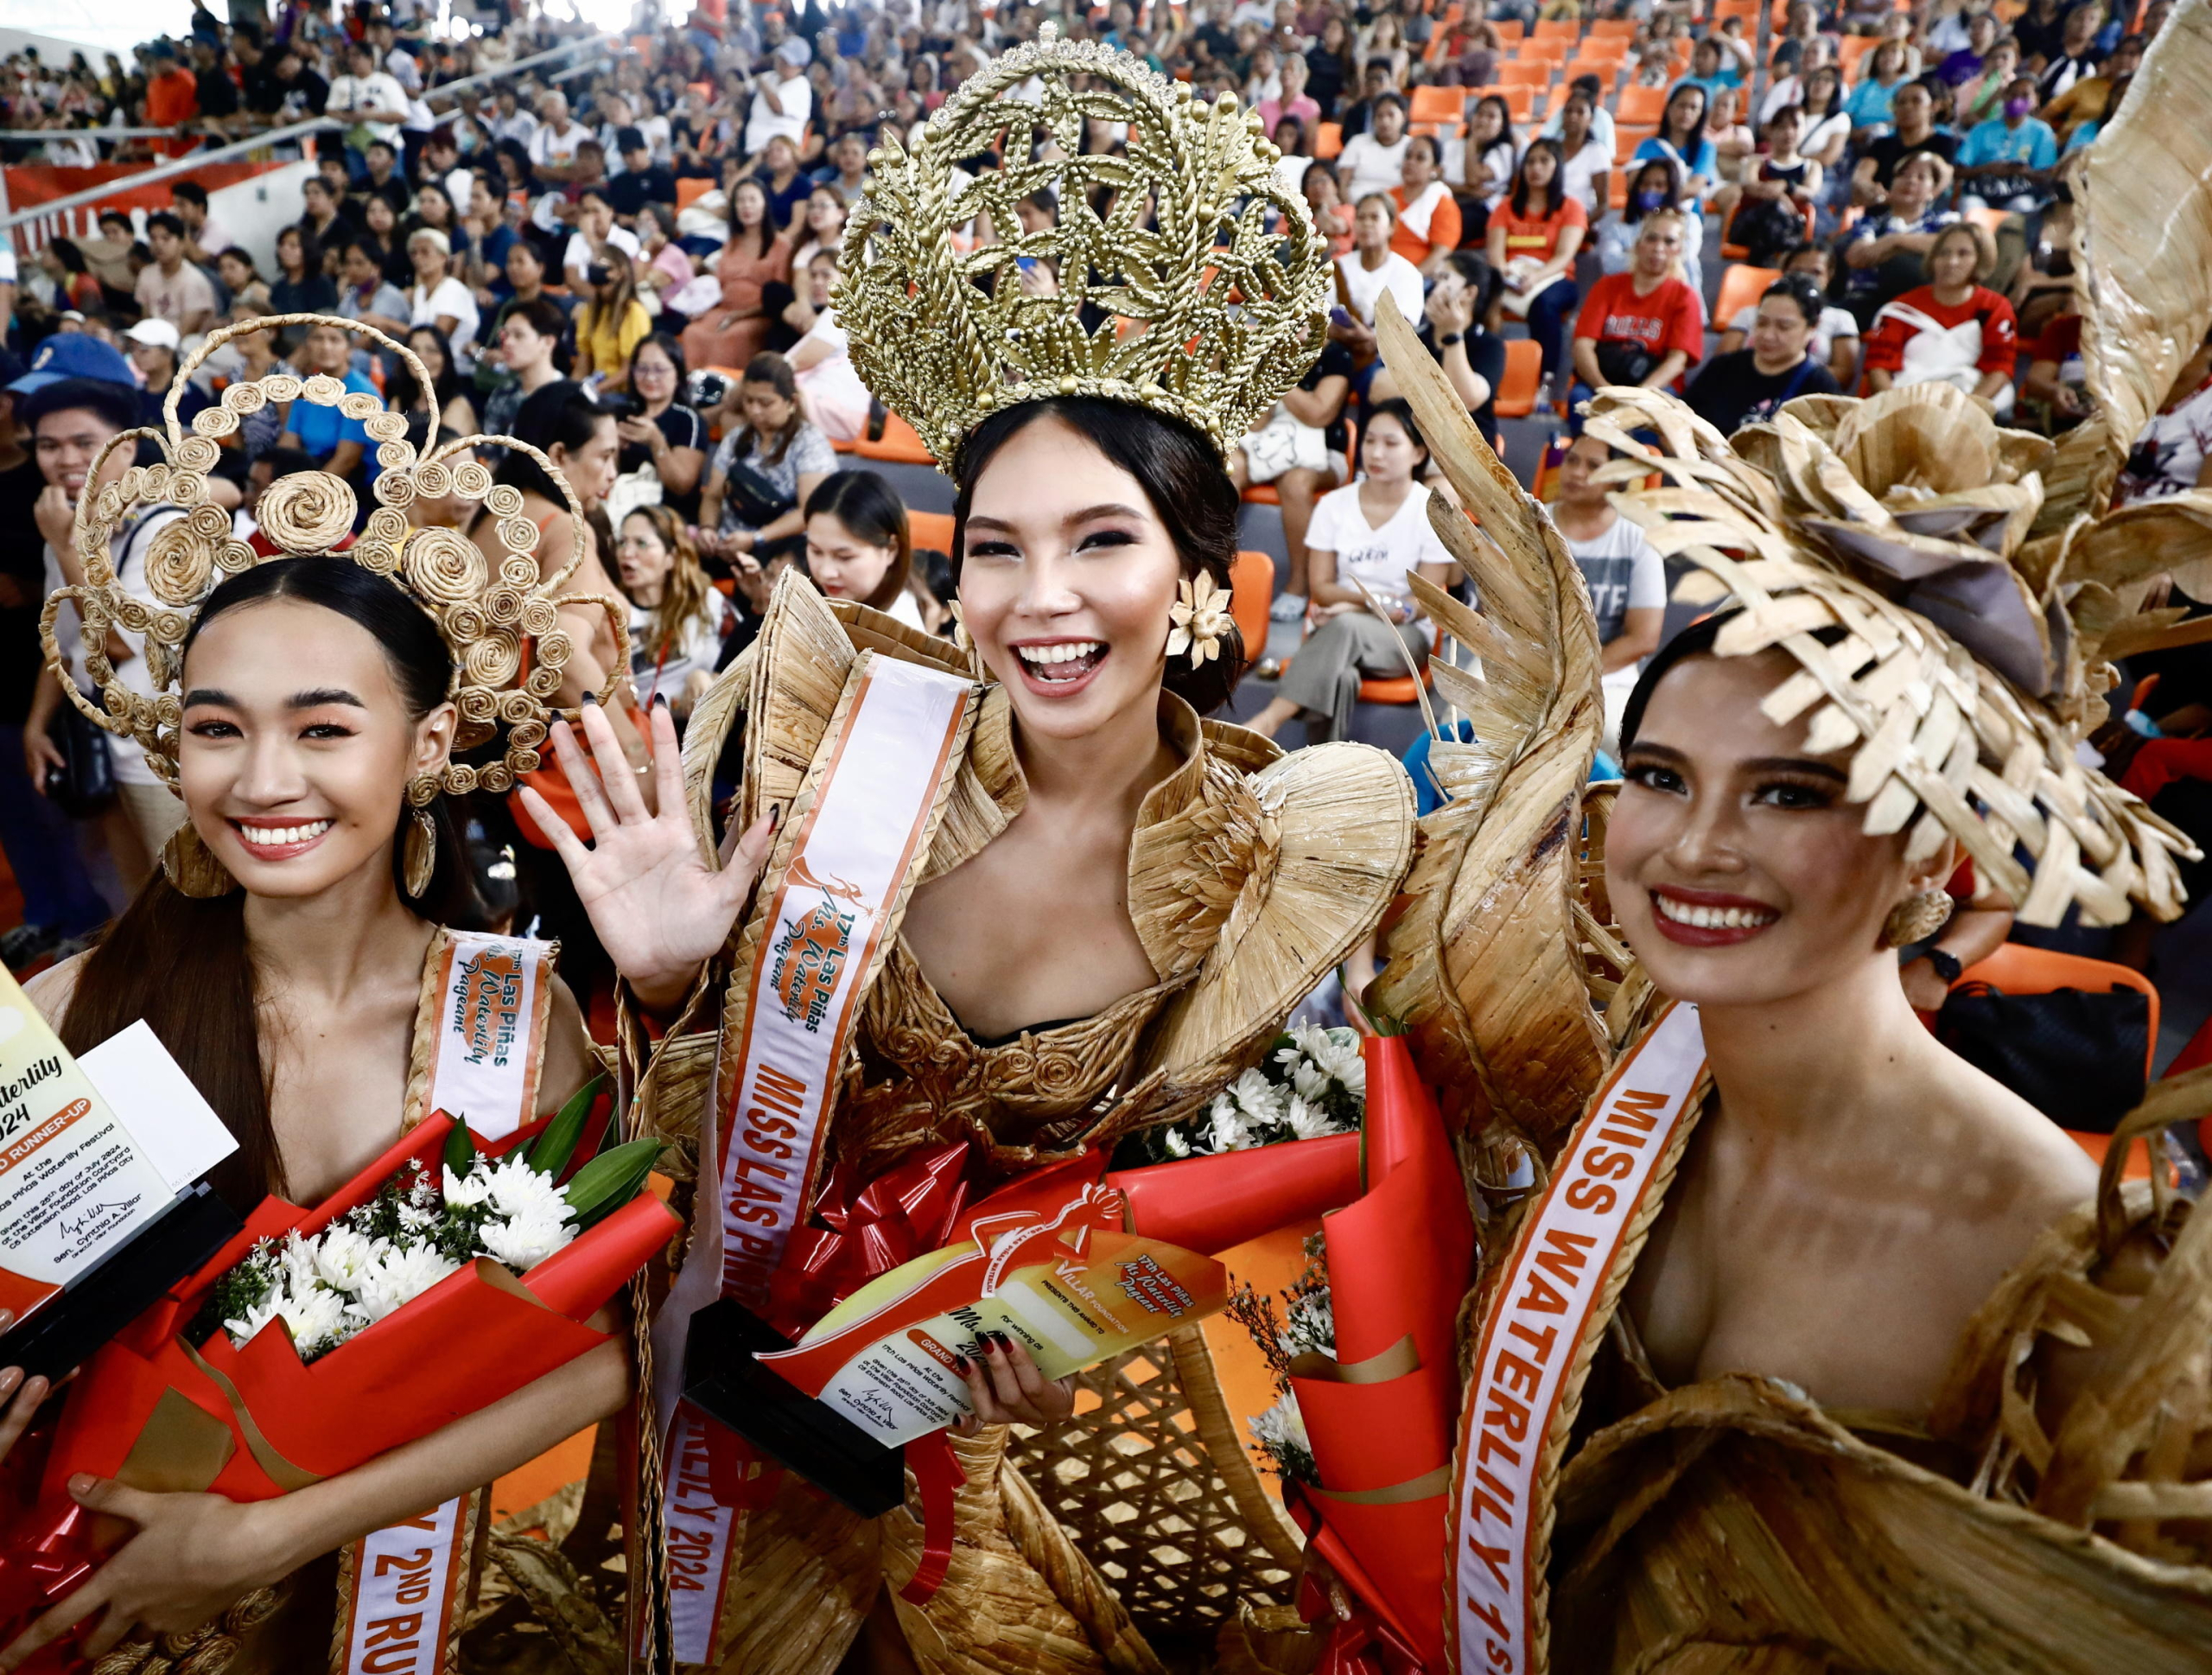 epa11529295 Miss Water Lily 2024 Lois Vivien Garce (C), First runner-up Irish Silades (R) and Second runner-up Micha Selena Rayo (L), wearing gowns made from dried water hyacinth stalks, pose during the Water Lily Festival coronation event in Las Pinas city, Metro Manila, Philippines, 06 August 2024. The annual Water Lily Festival in Las Pinas city was declared by the Villar Foundation to highlight the transformation of water lilies from aquatic nuisances to valuable resources. Through the 'Water Lily Weaving Project', the foundation turns these plants into handicrafts, creating livelihoods and aiding community rehabilitation. During the festival, villagers parade in traditional costumes made from dried water lilies, showcasing the project's success and promoting the benefits of water lily-based livelihoods for local residents.  EPA/FRANCIS R. MALASIG